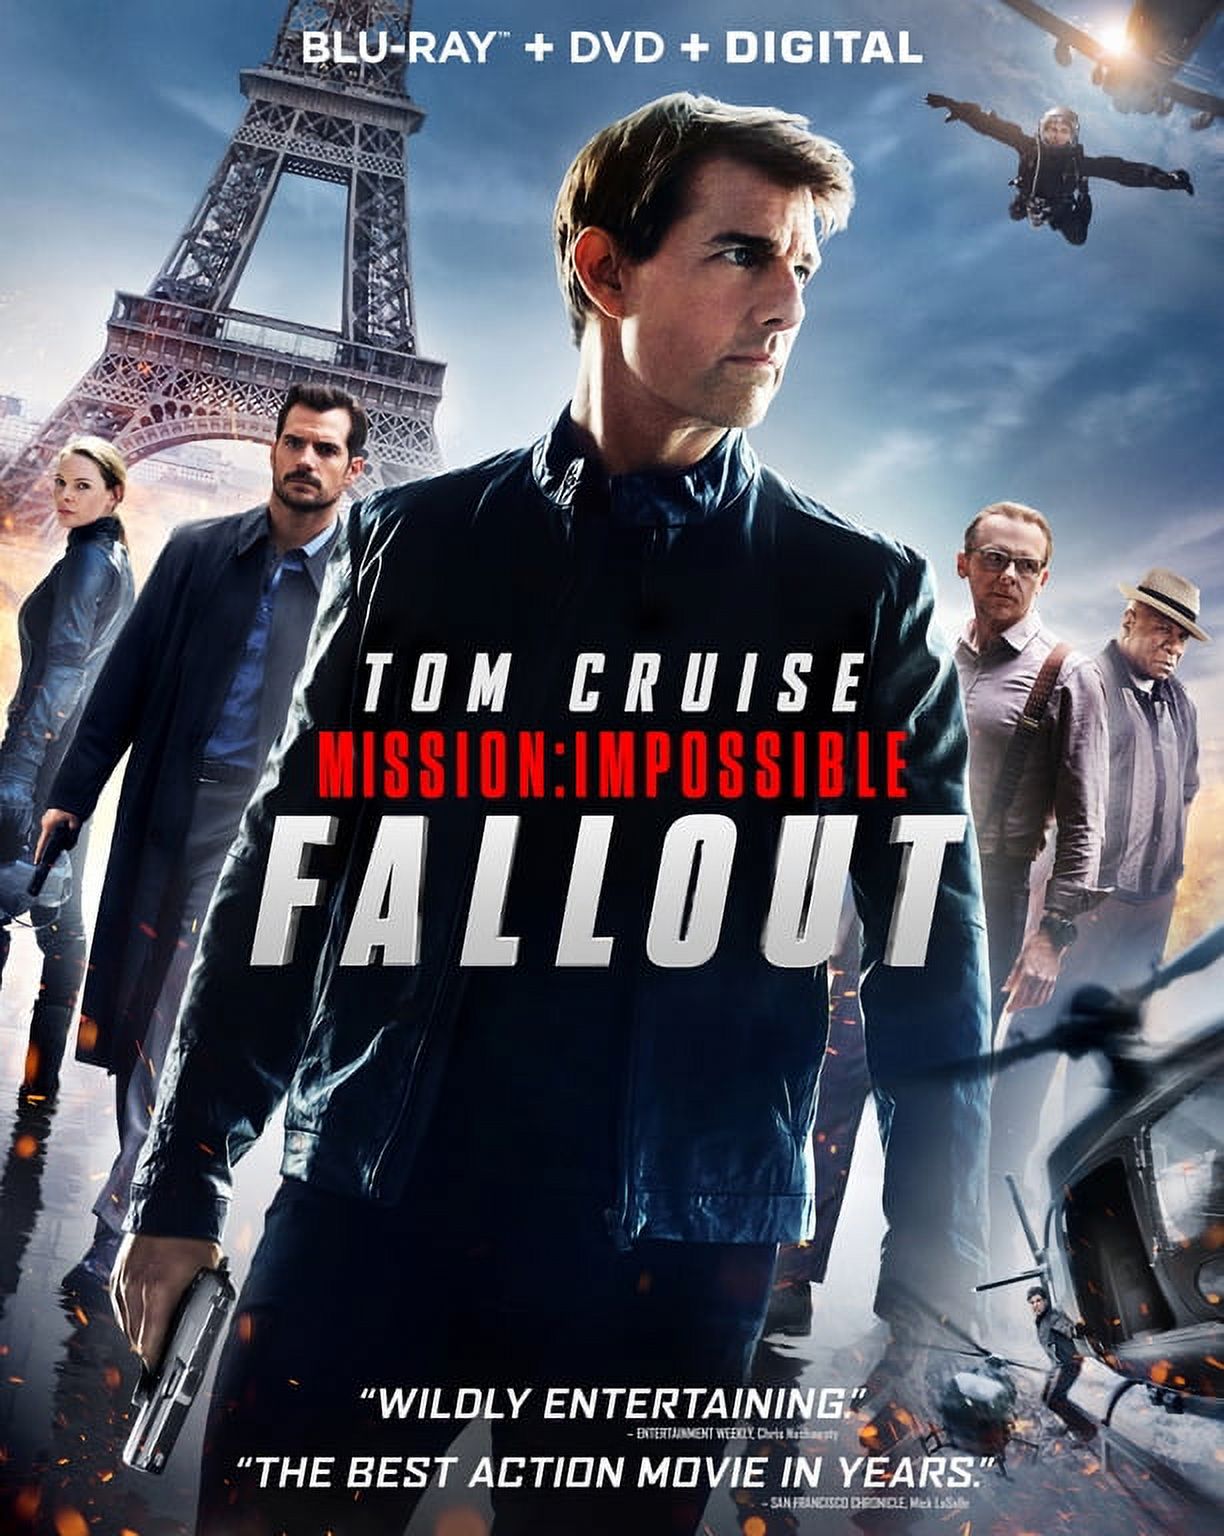 Mission: Impossible: Fallout (Blu-ray + DVD + Digital Copy), Paramount, Action & Adventure - image 2 of 2